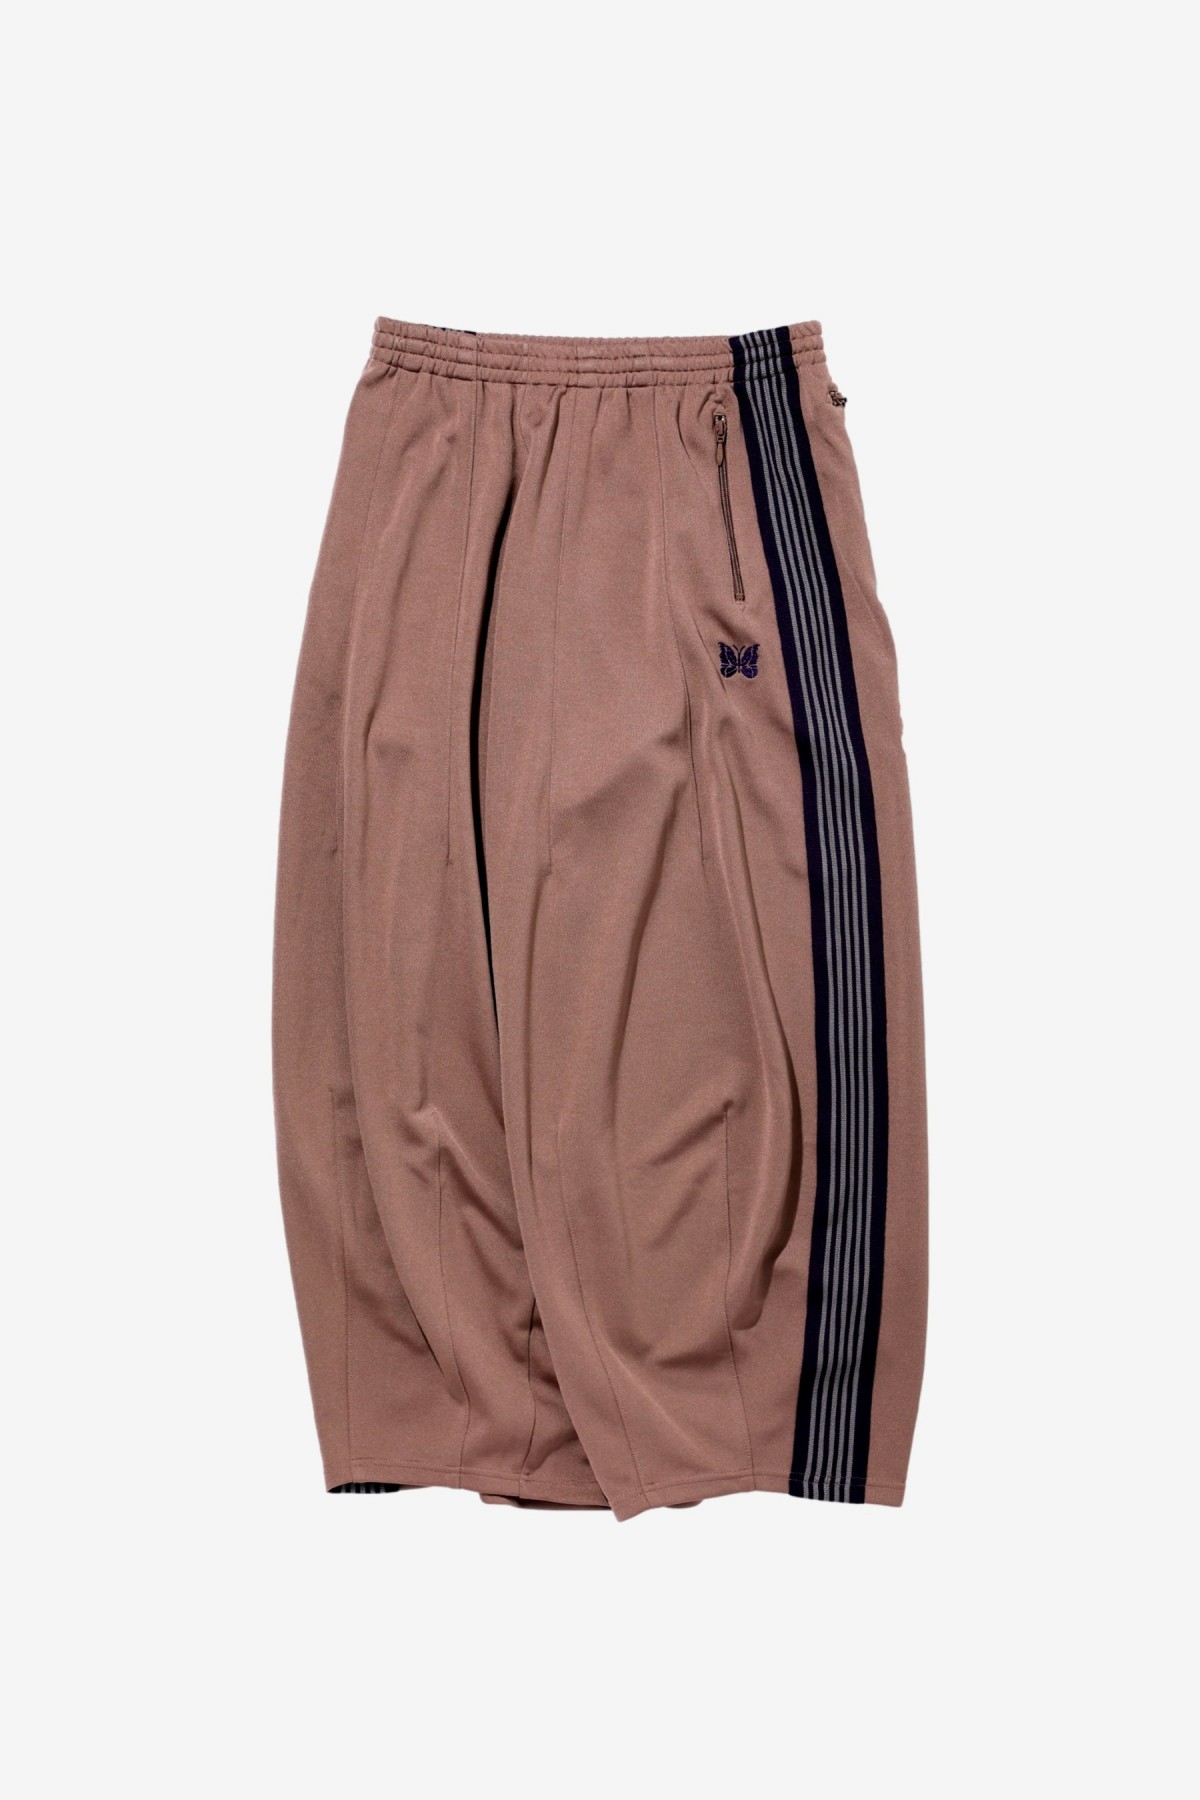 Needles H.D. Track Pant in Taupe